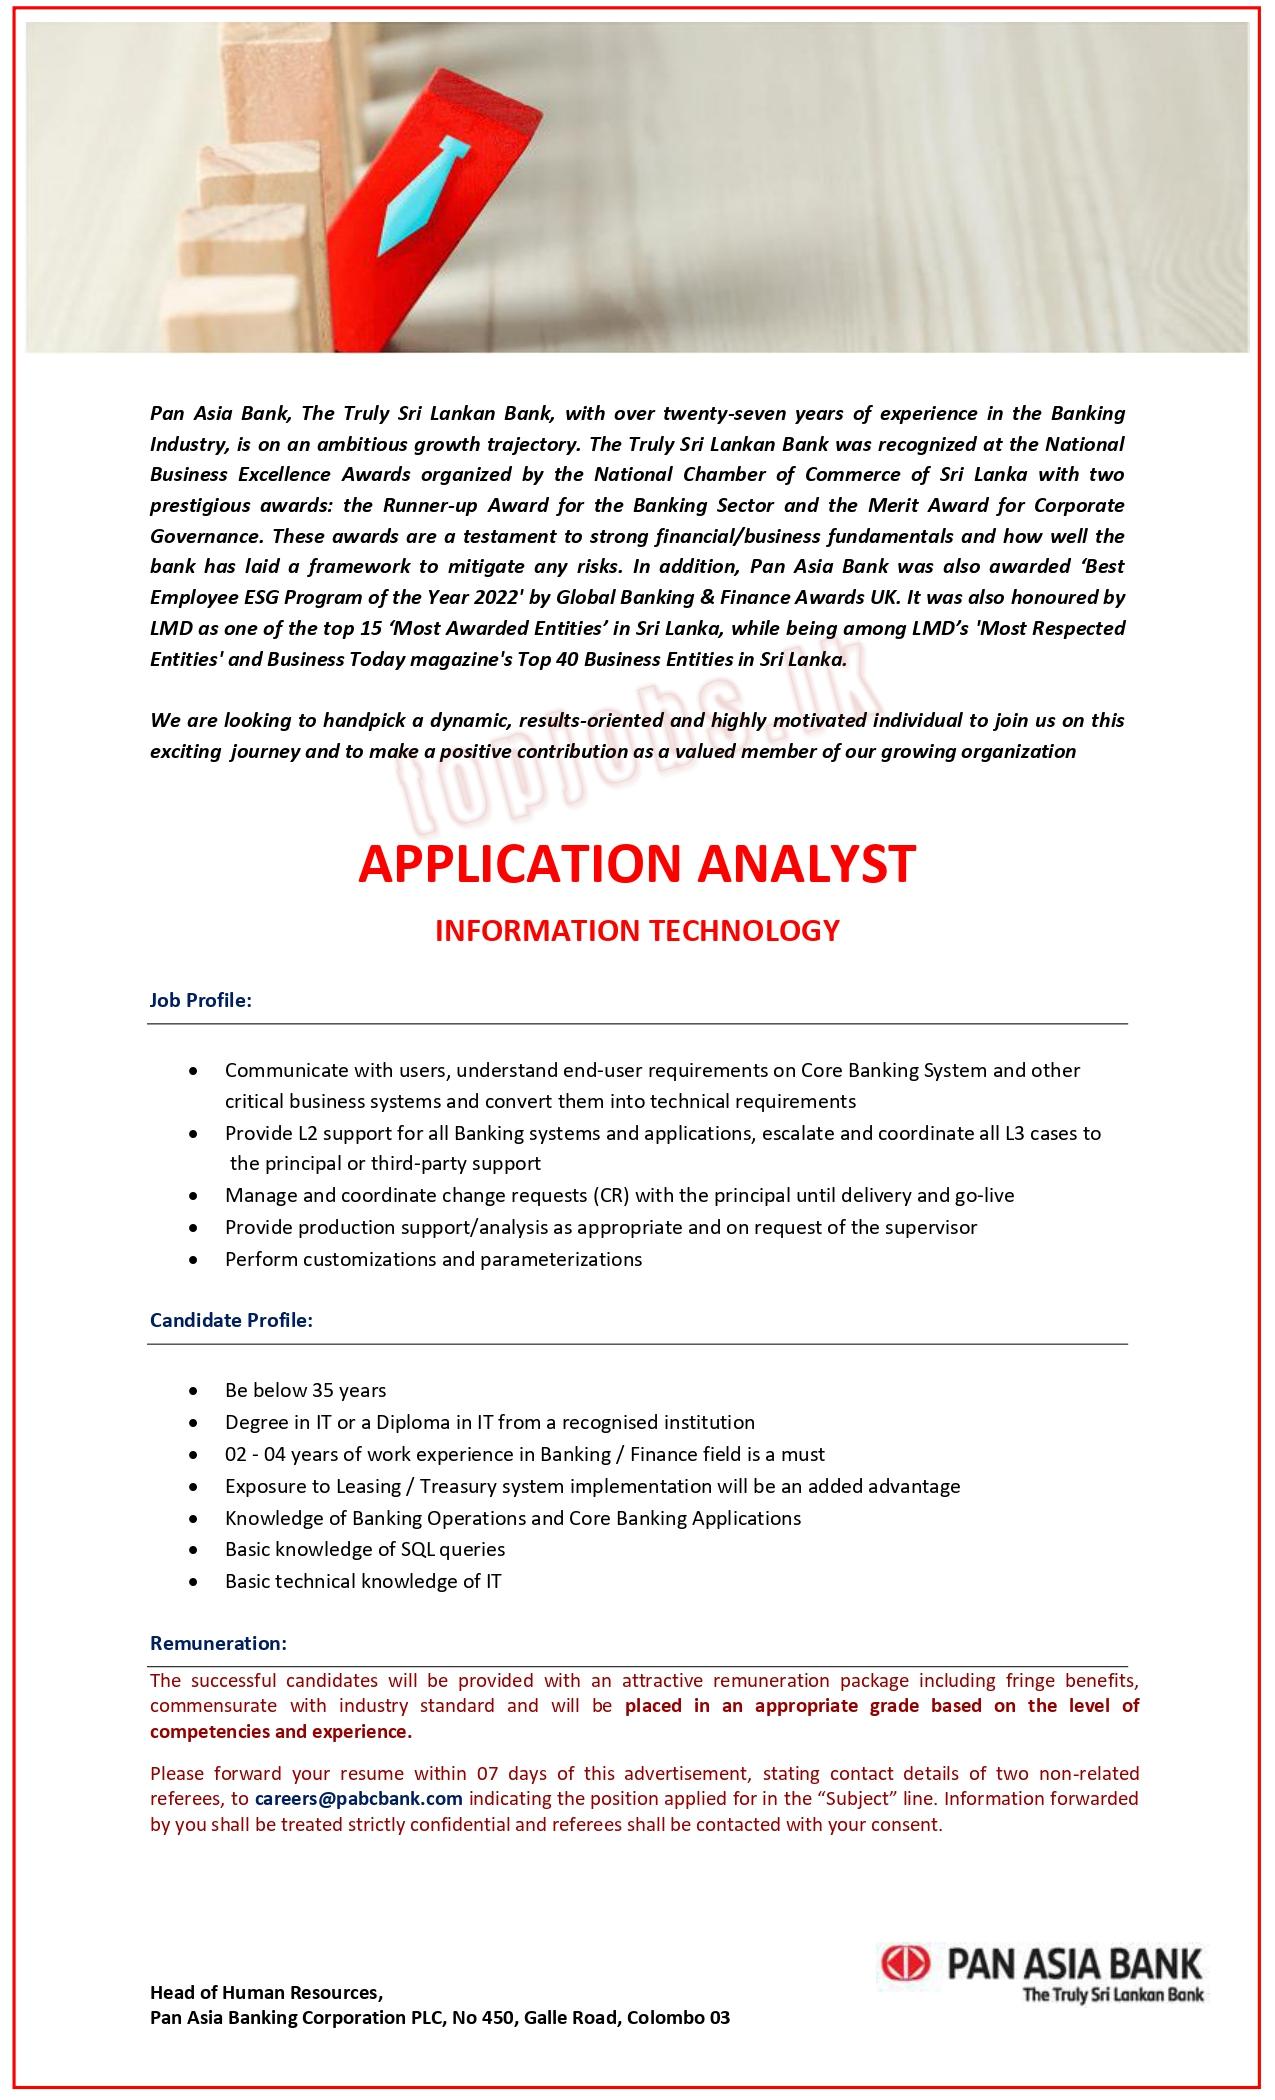 Application Analyst - Information Technology